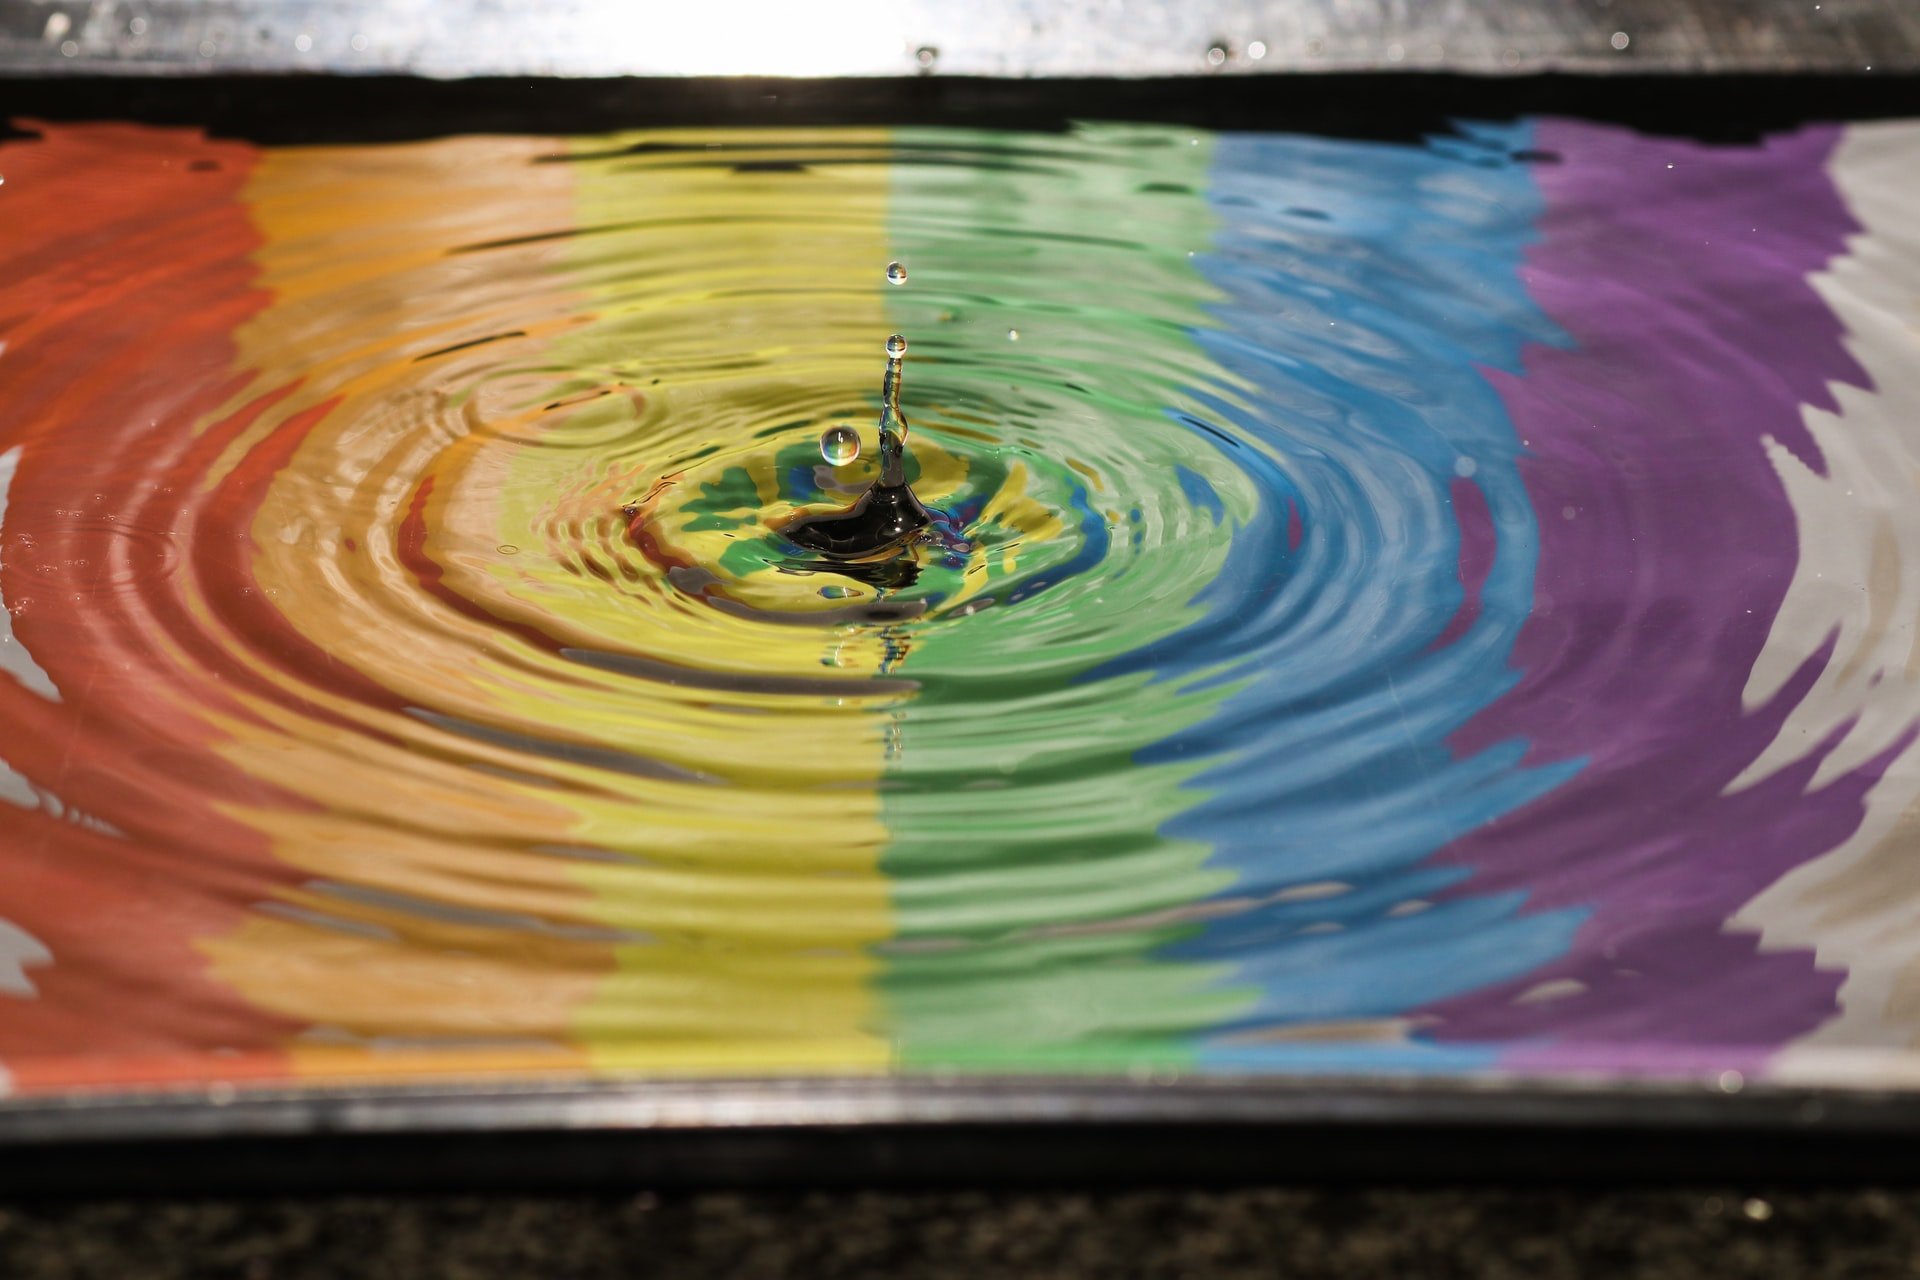 A picture of a drop landing in a raindbow coloured pool and distorting the surface